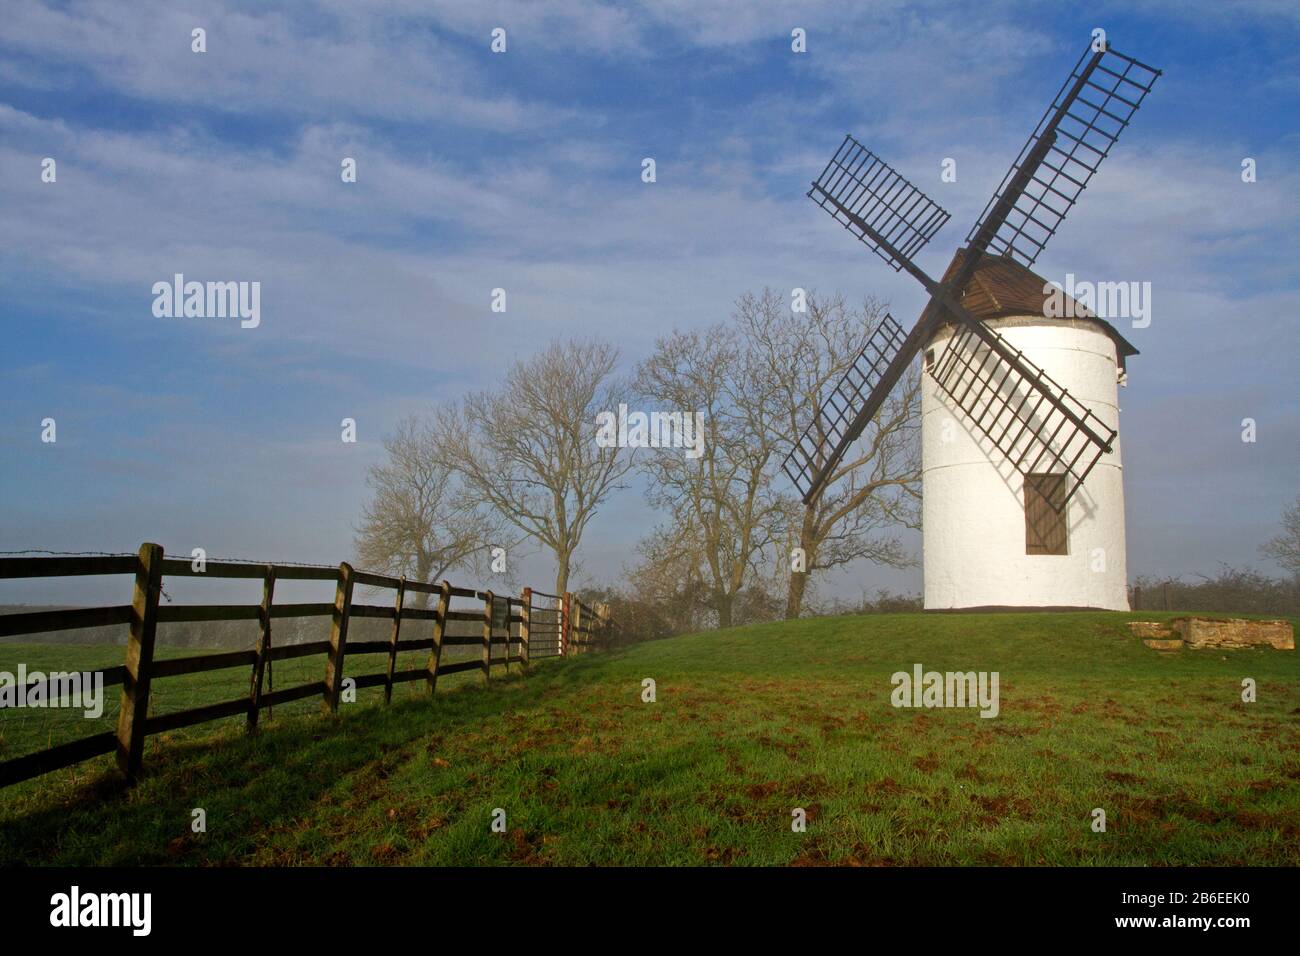 A misty winter view of Ashton windmill, a tower mill in Chapel Allerton, Somerset, England Stock Photo